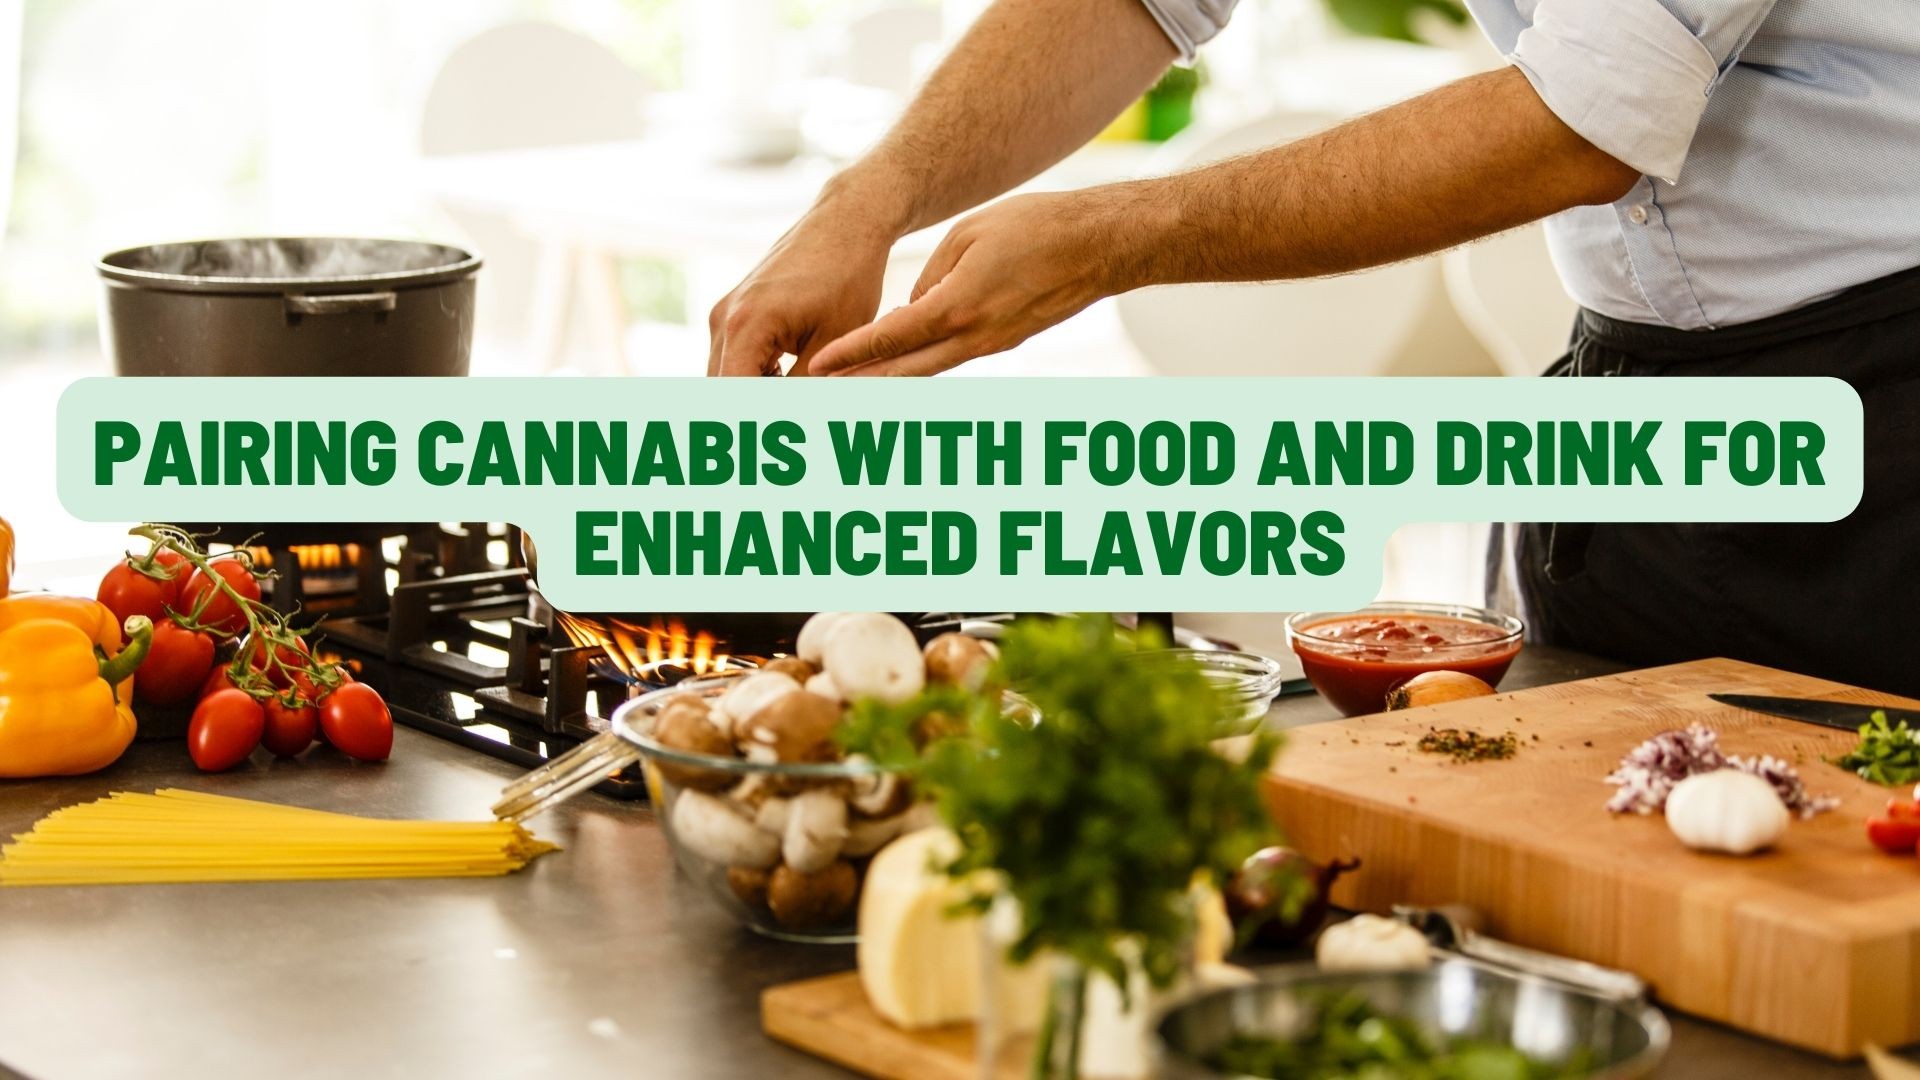 Pairing Cannabis with Food and Drink for Enhanced Flavors